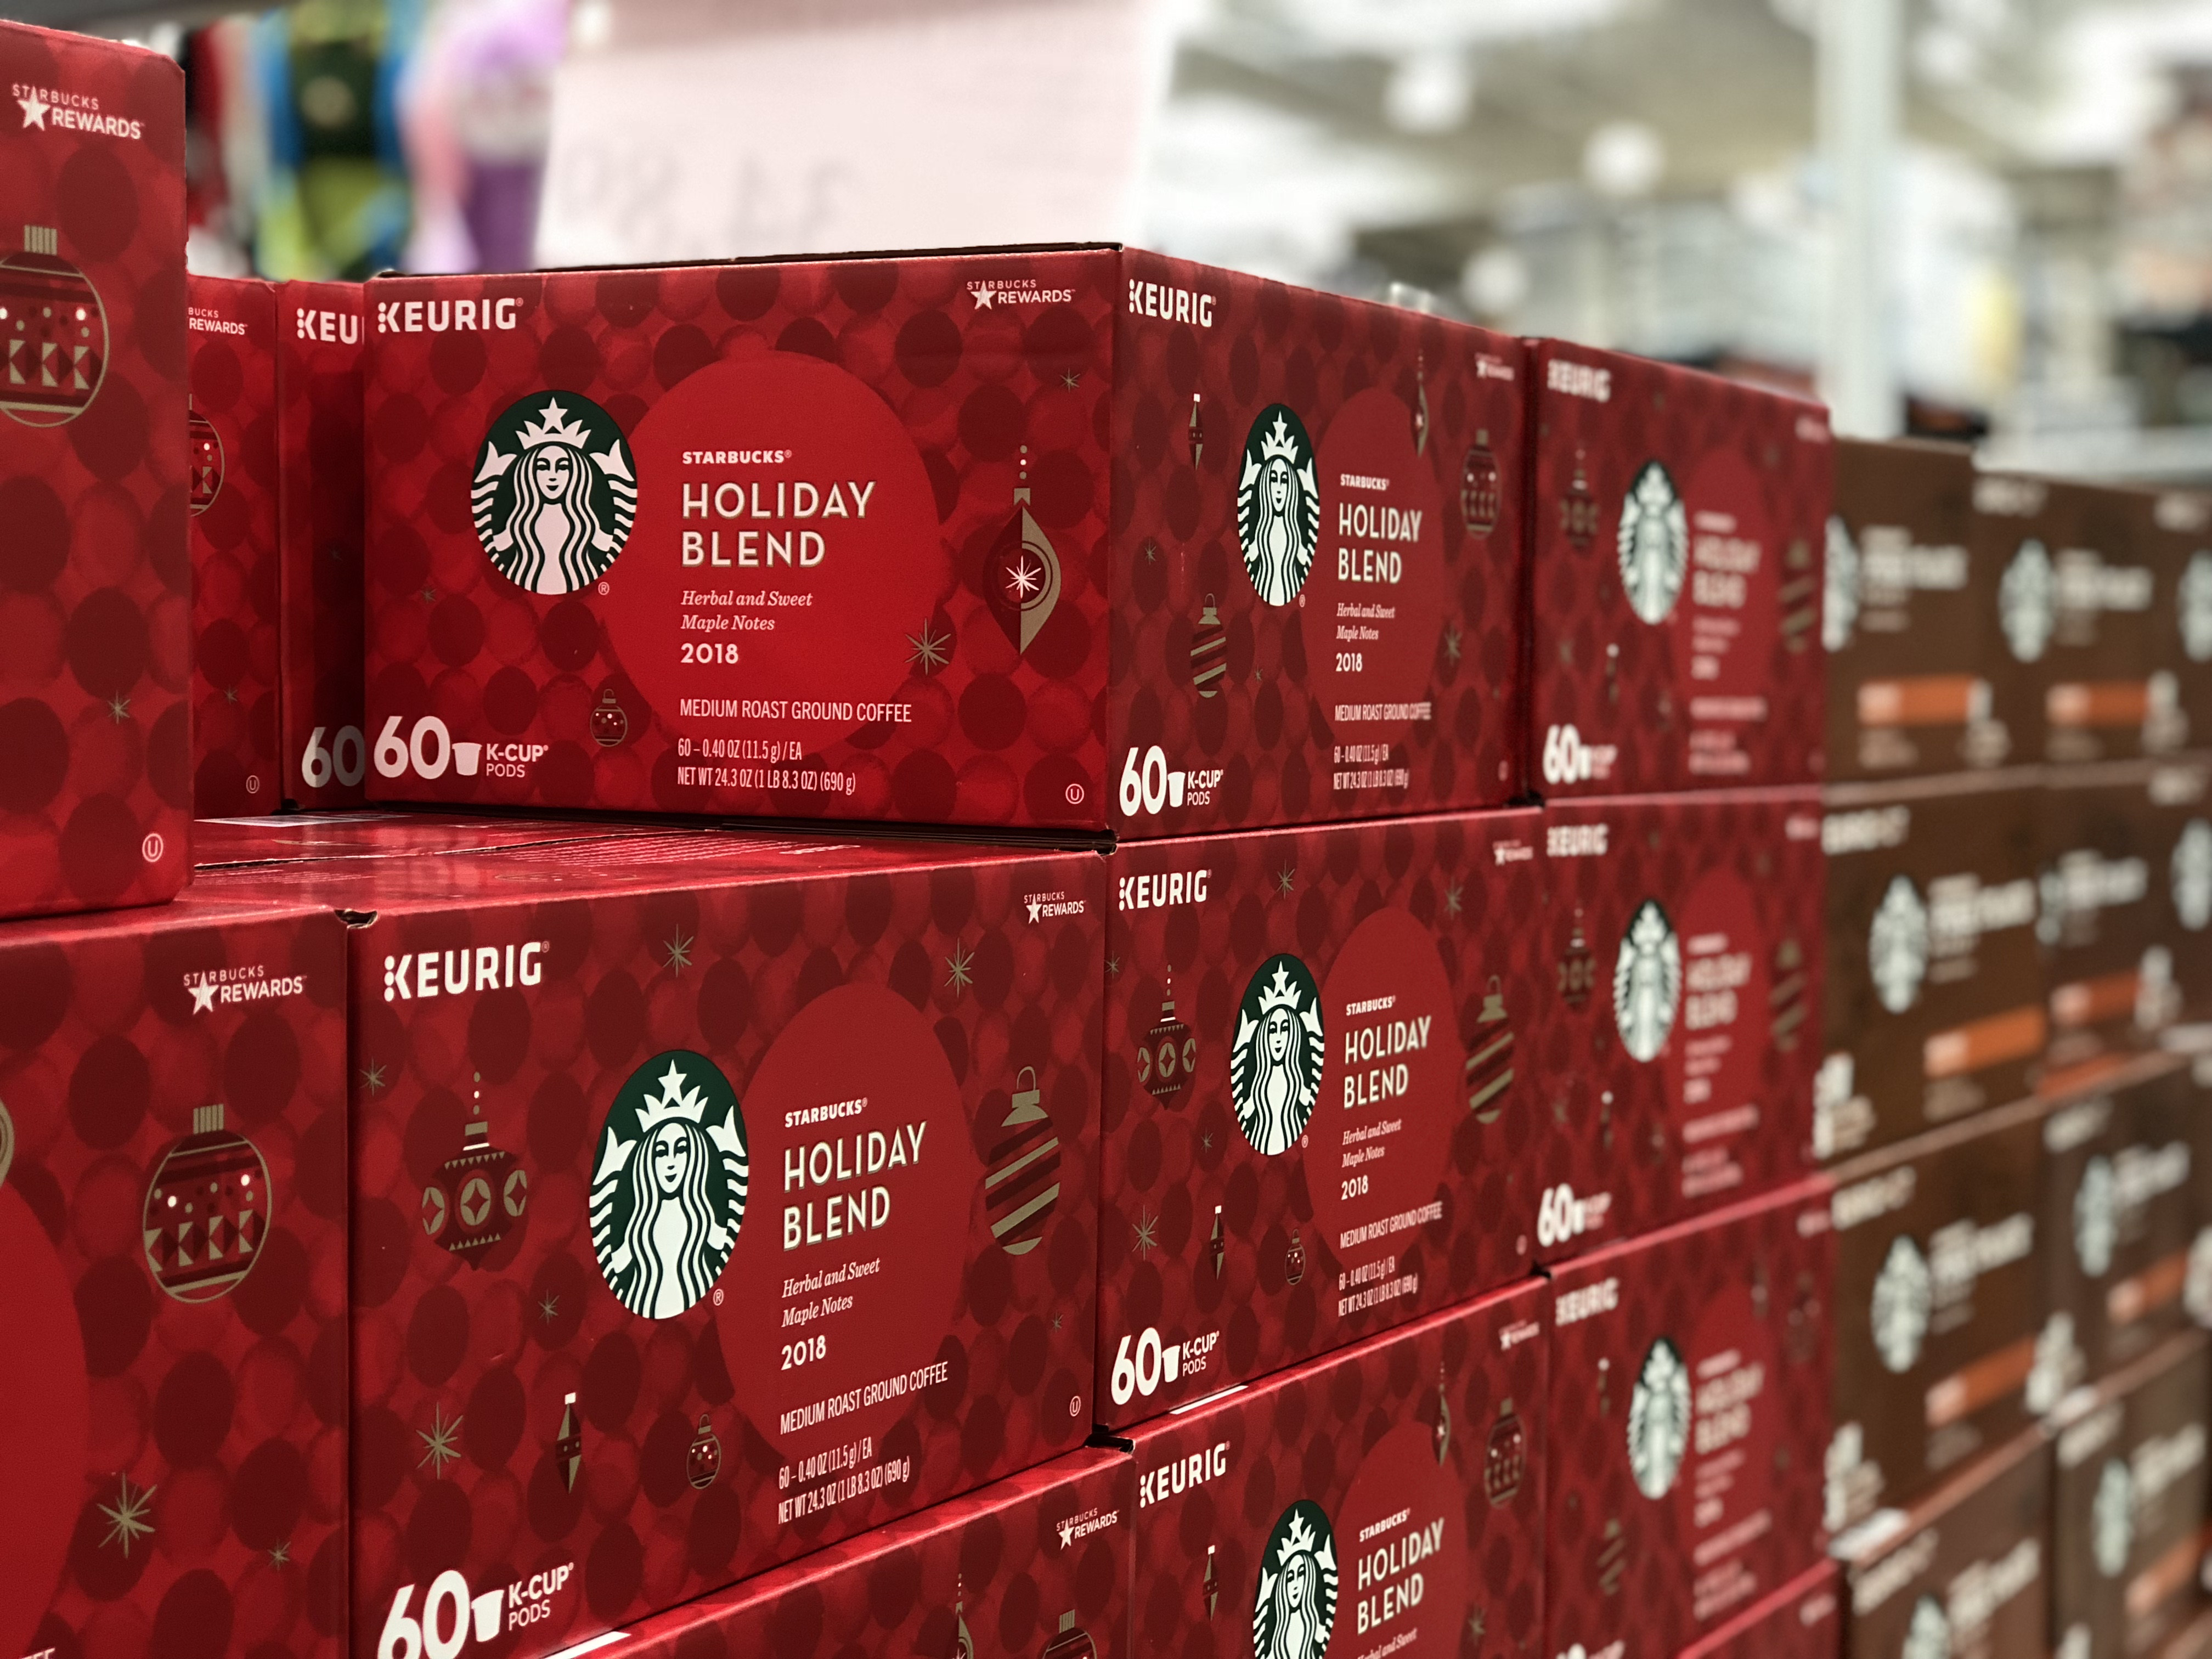 Starbucks Holiday Blend K-Cups at Costco